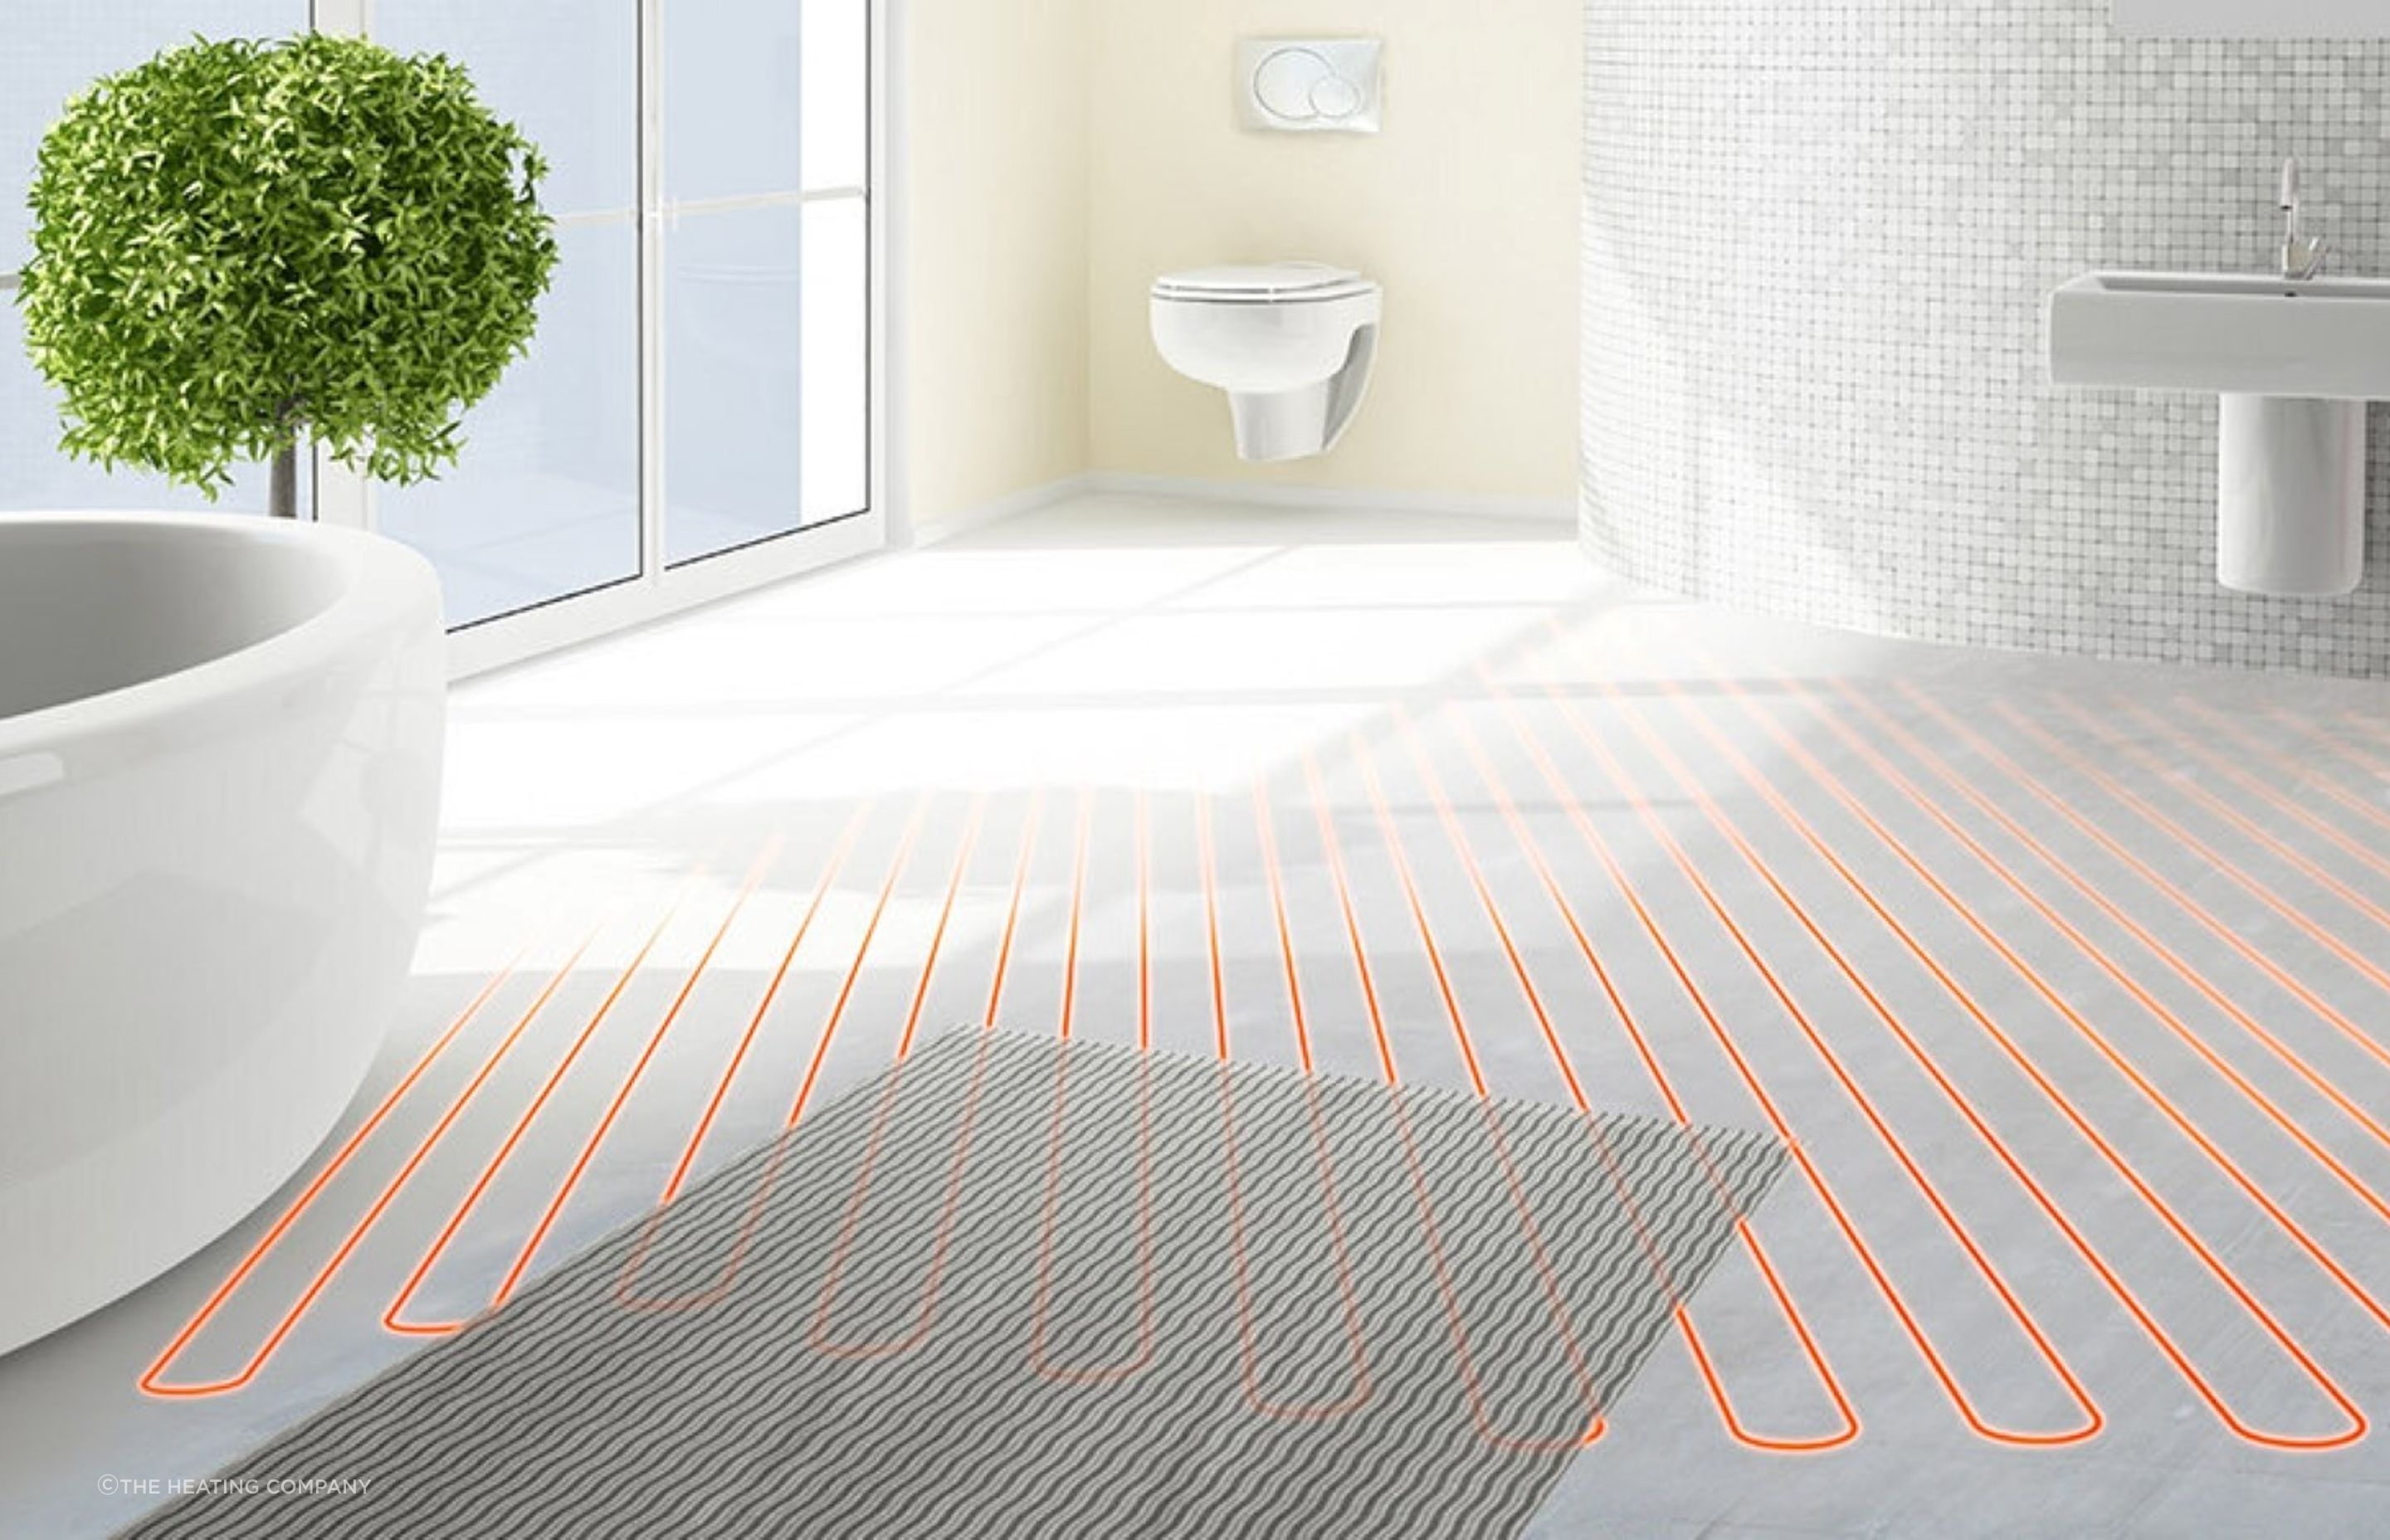 A graphic that demonstrates the layout of an under tile heating system, a luxurious addition to a bathroom.